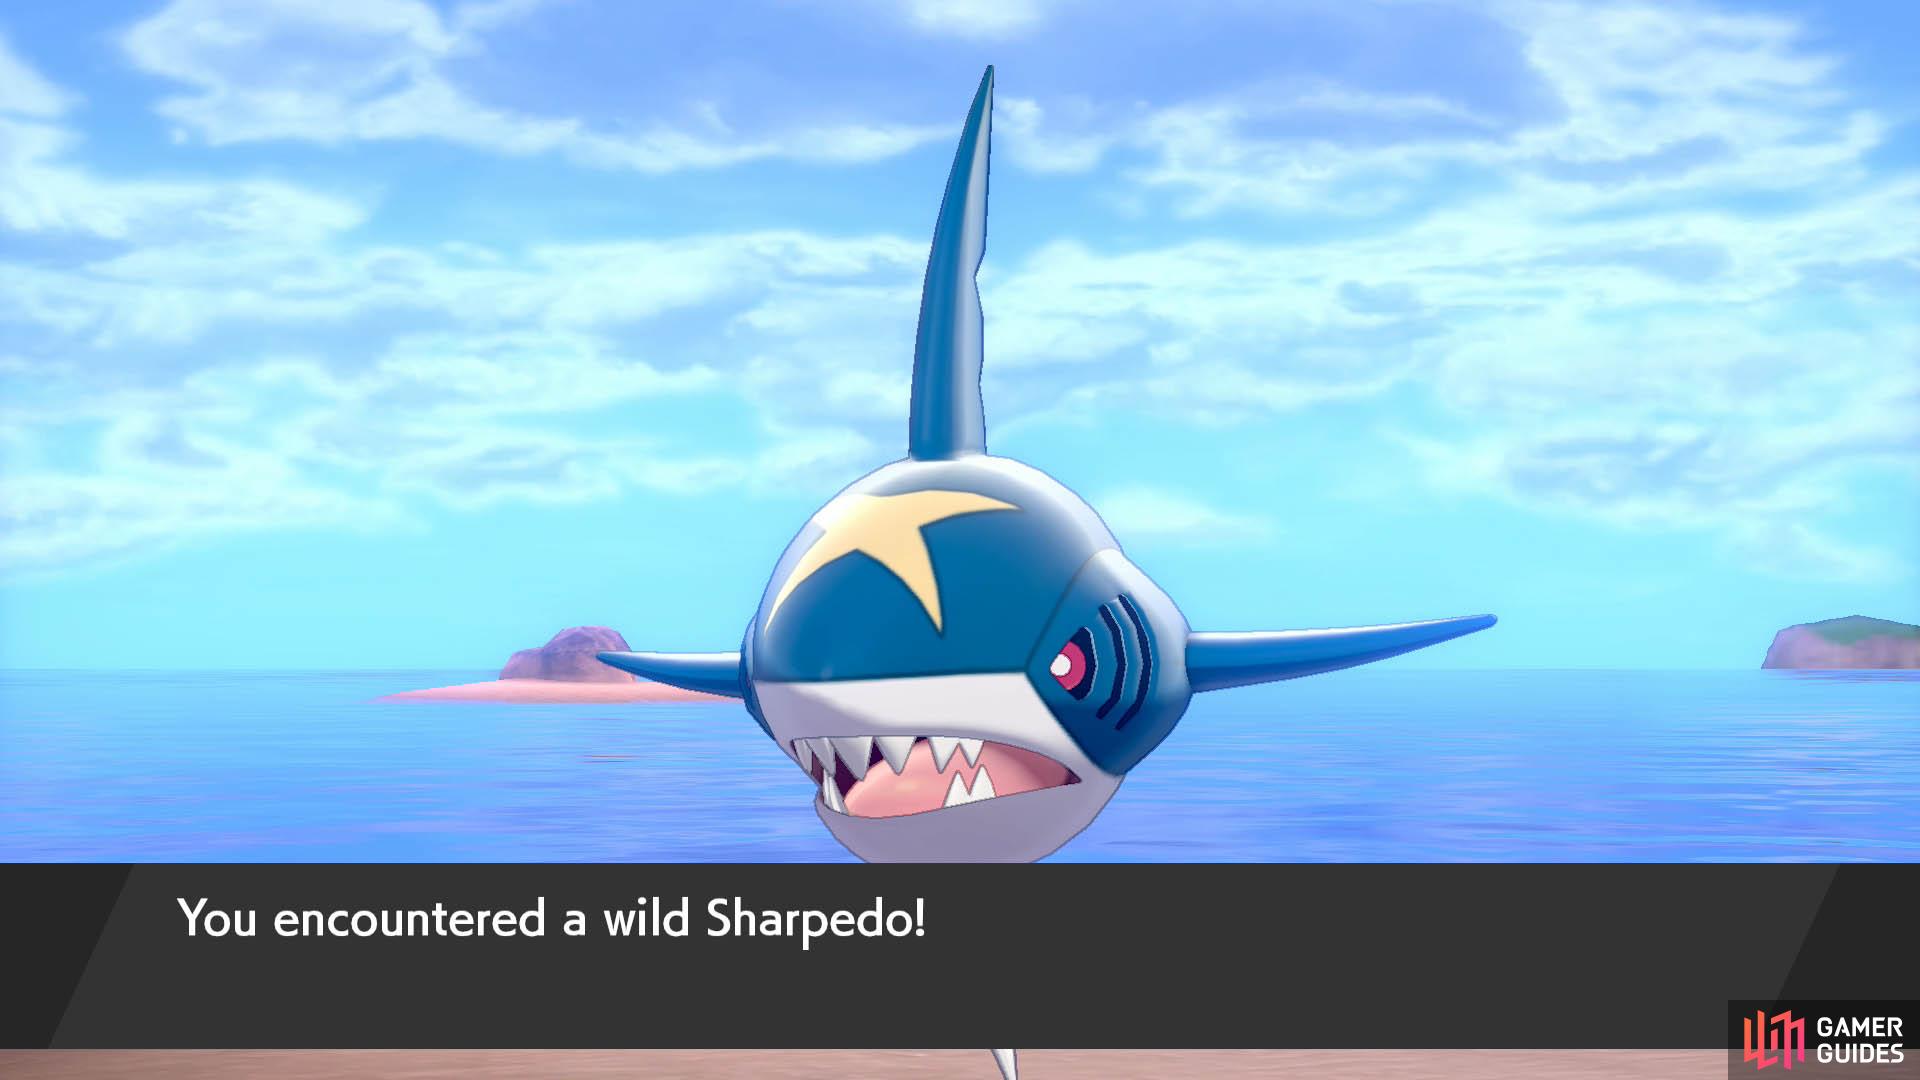 There are multiple Sharpedo spawn areas in the sea. Once you enter them, a Sharpedo will start to chase you.